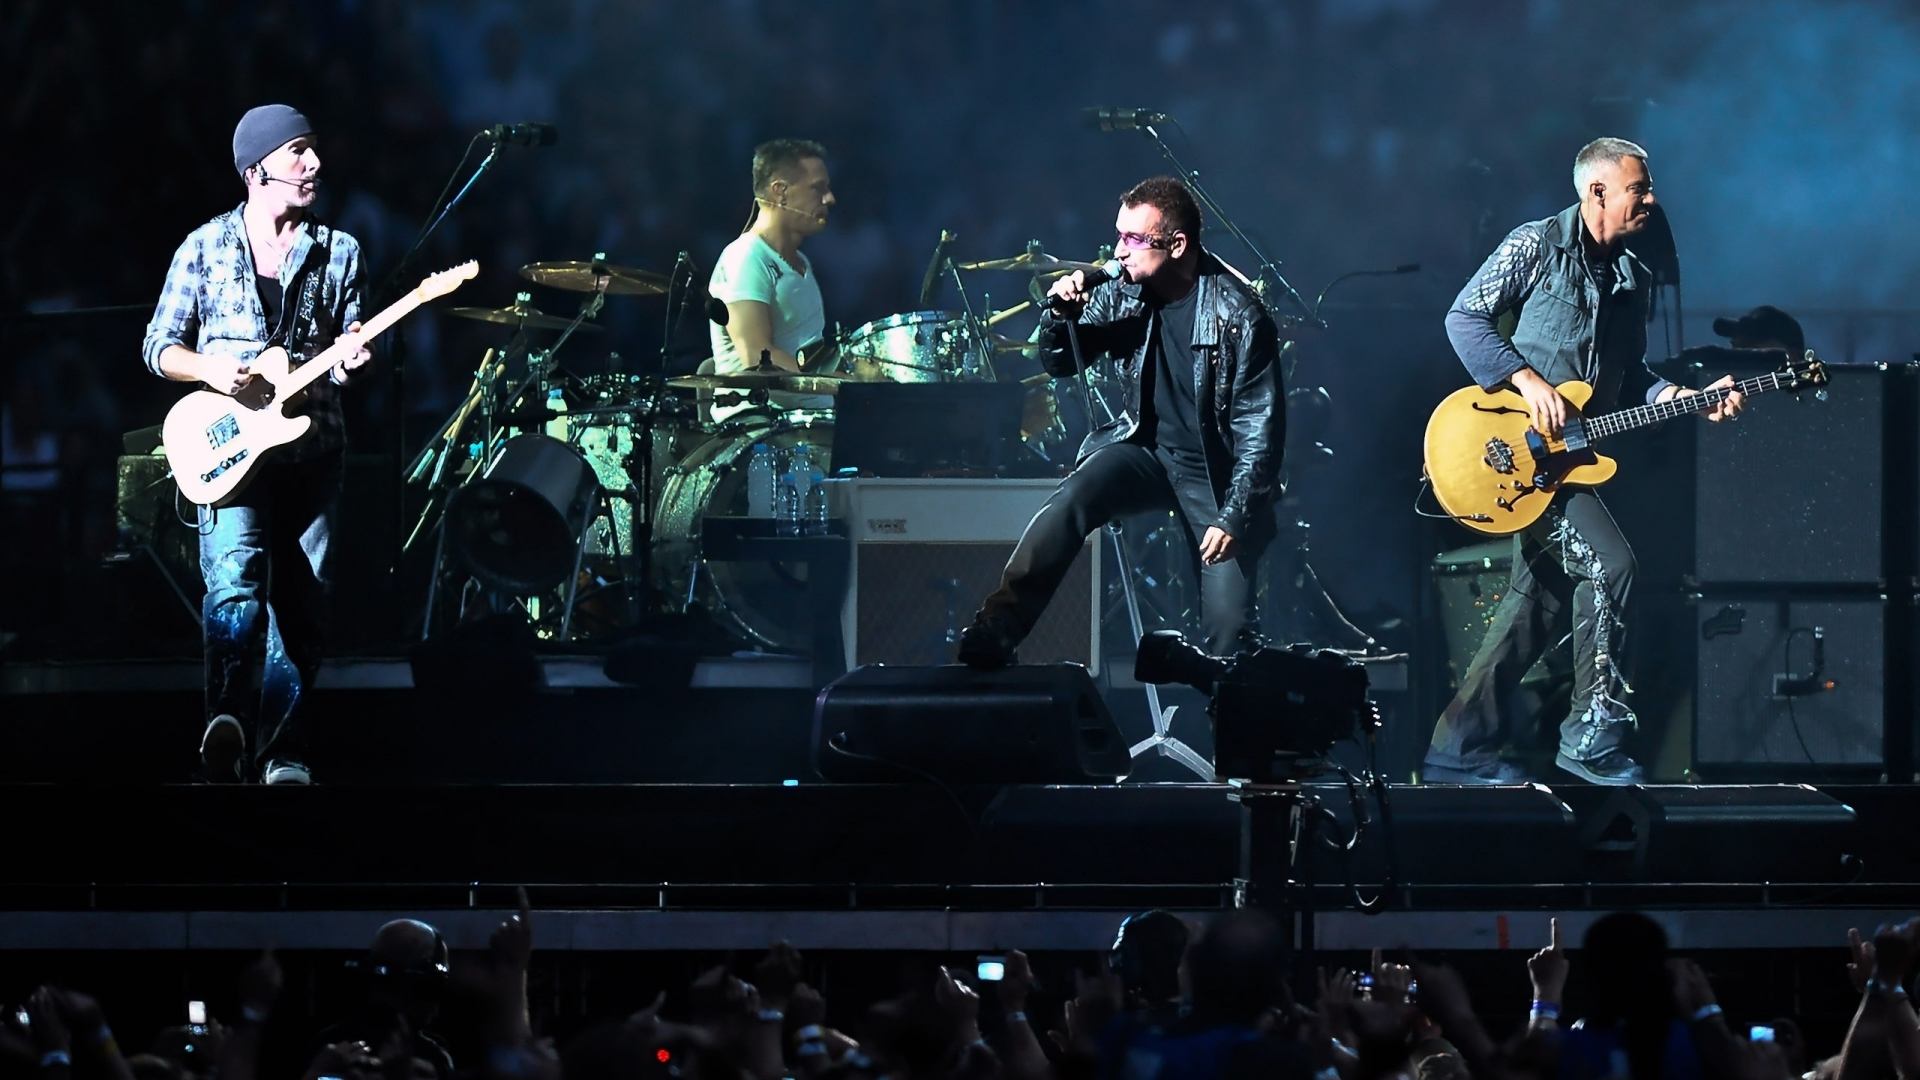 U2 band concert for 1920 x 1080 HDTV 1080p resolution